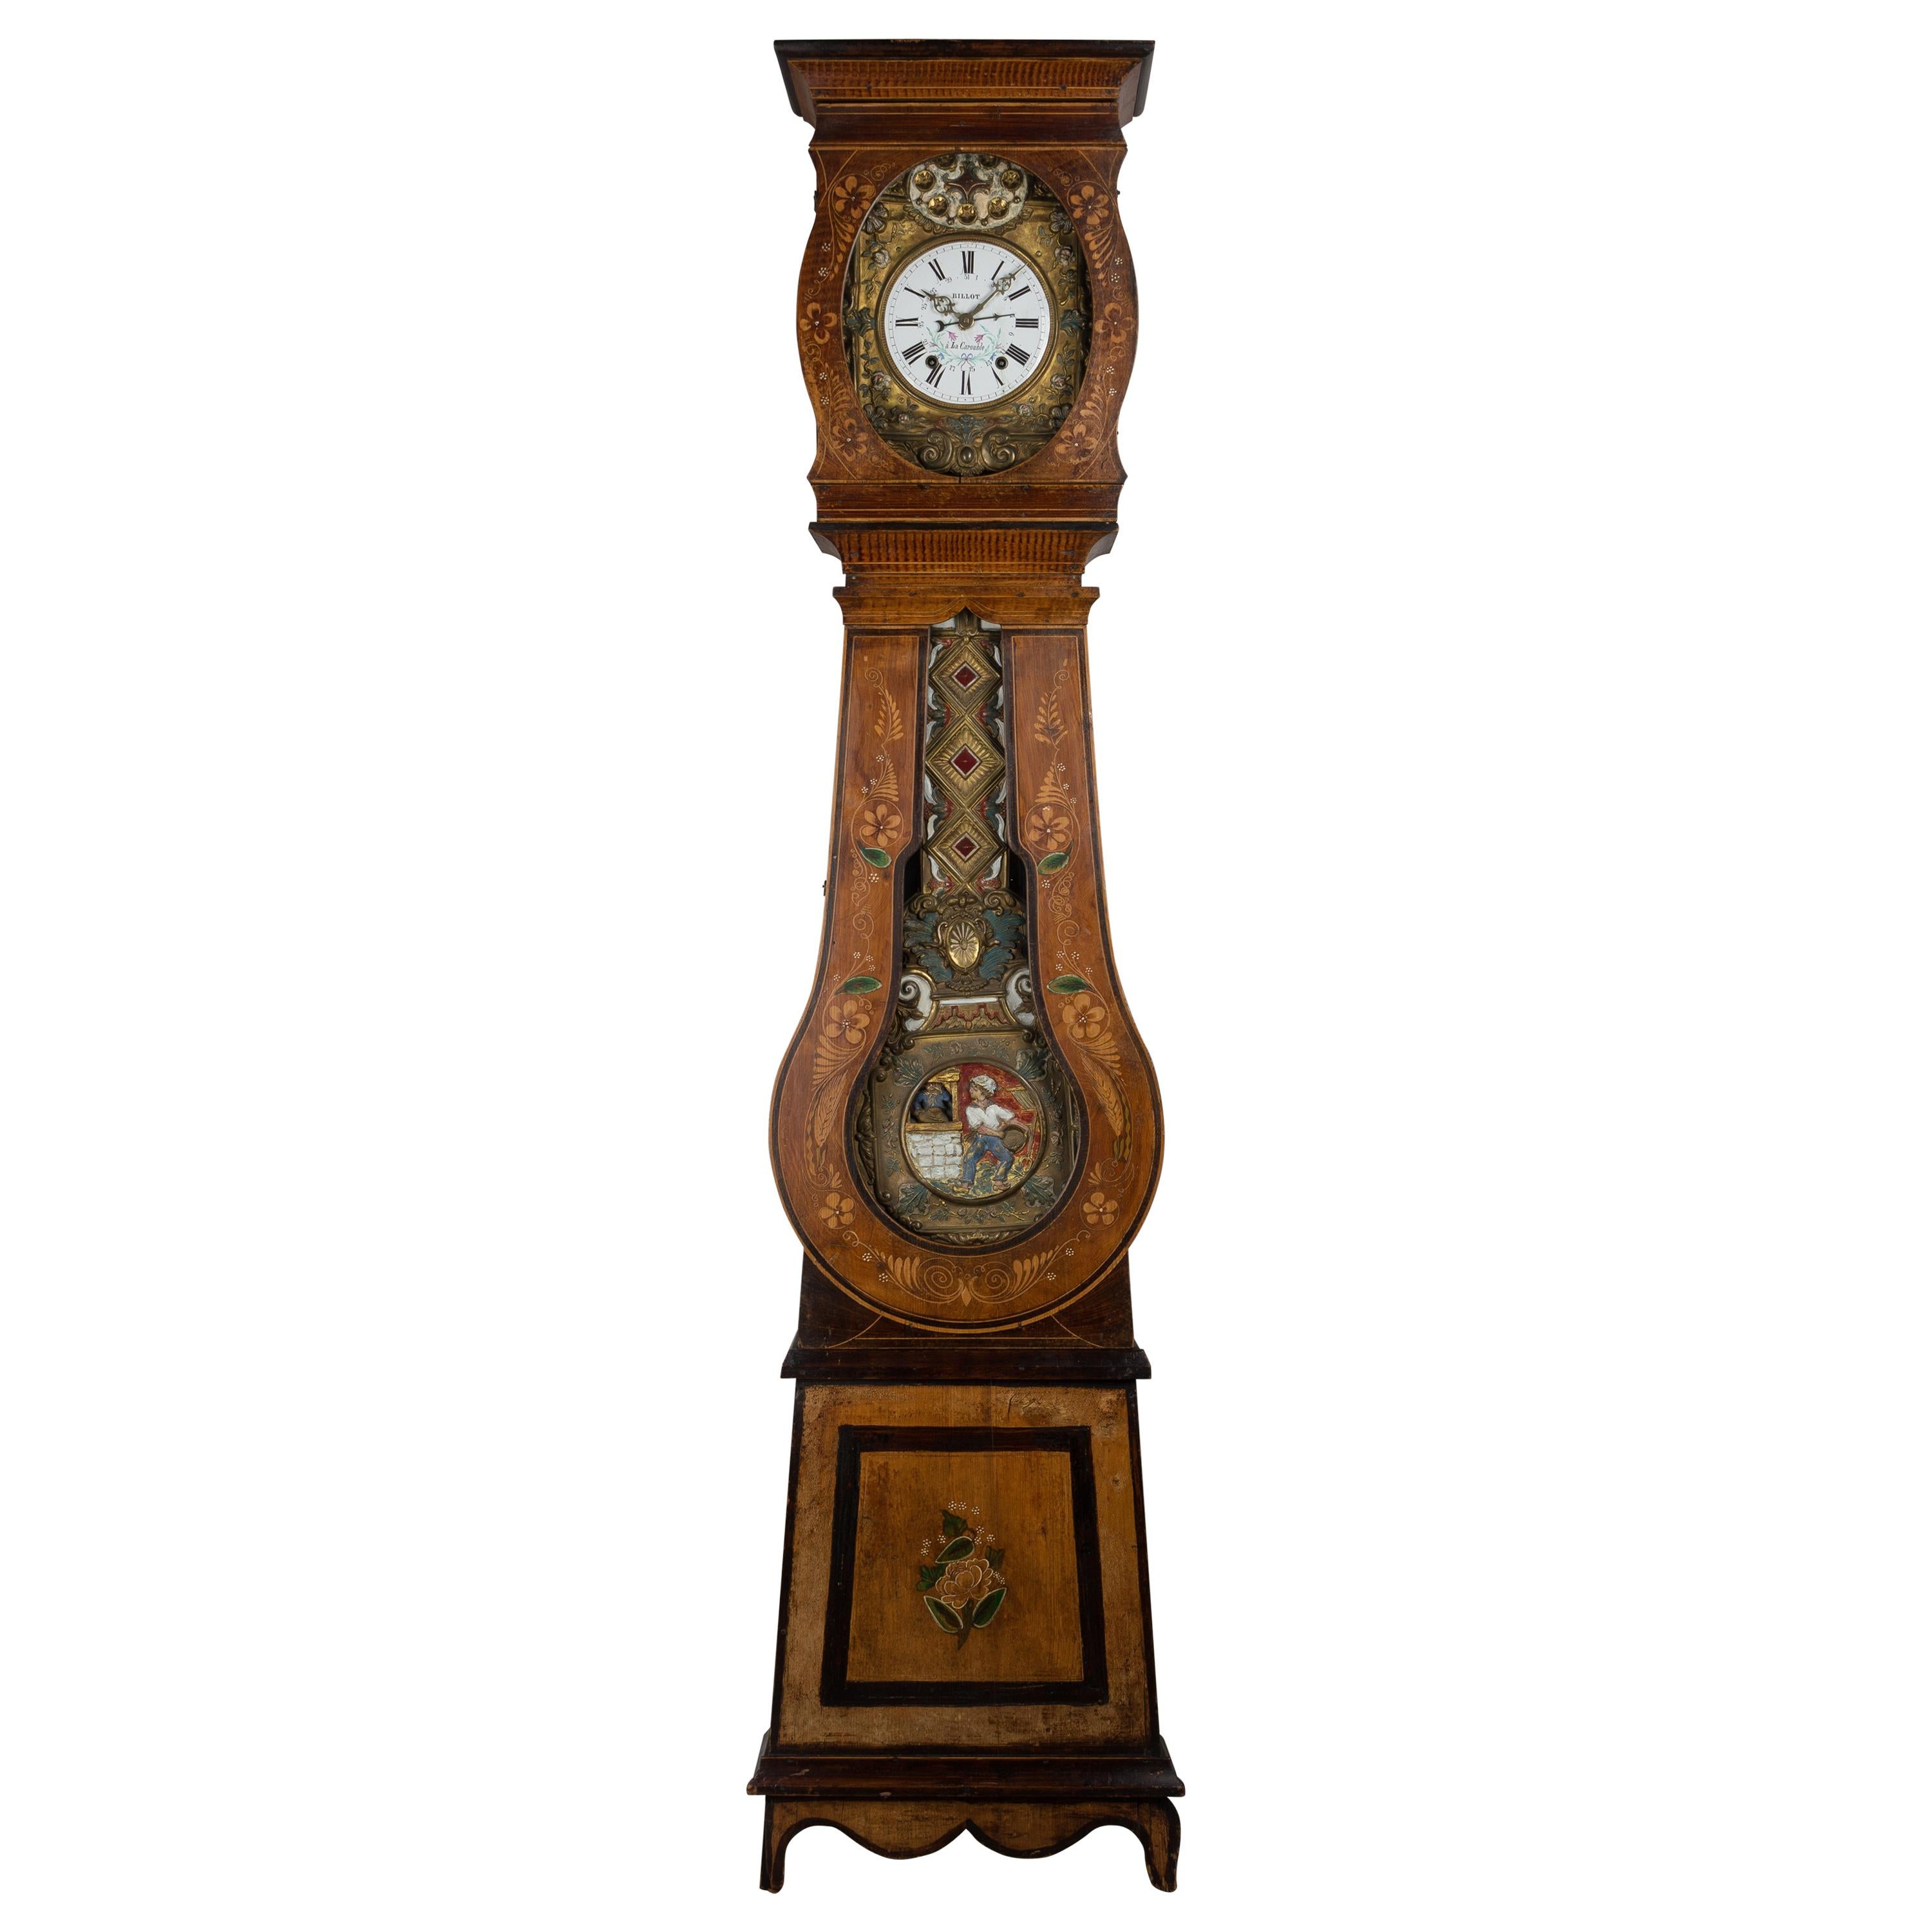 19th Century French Comtoise Grandfather Clock with Automate Pendulum